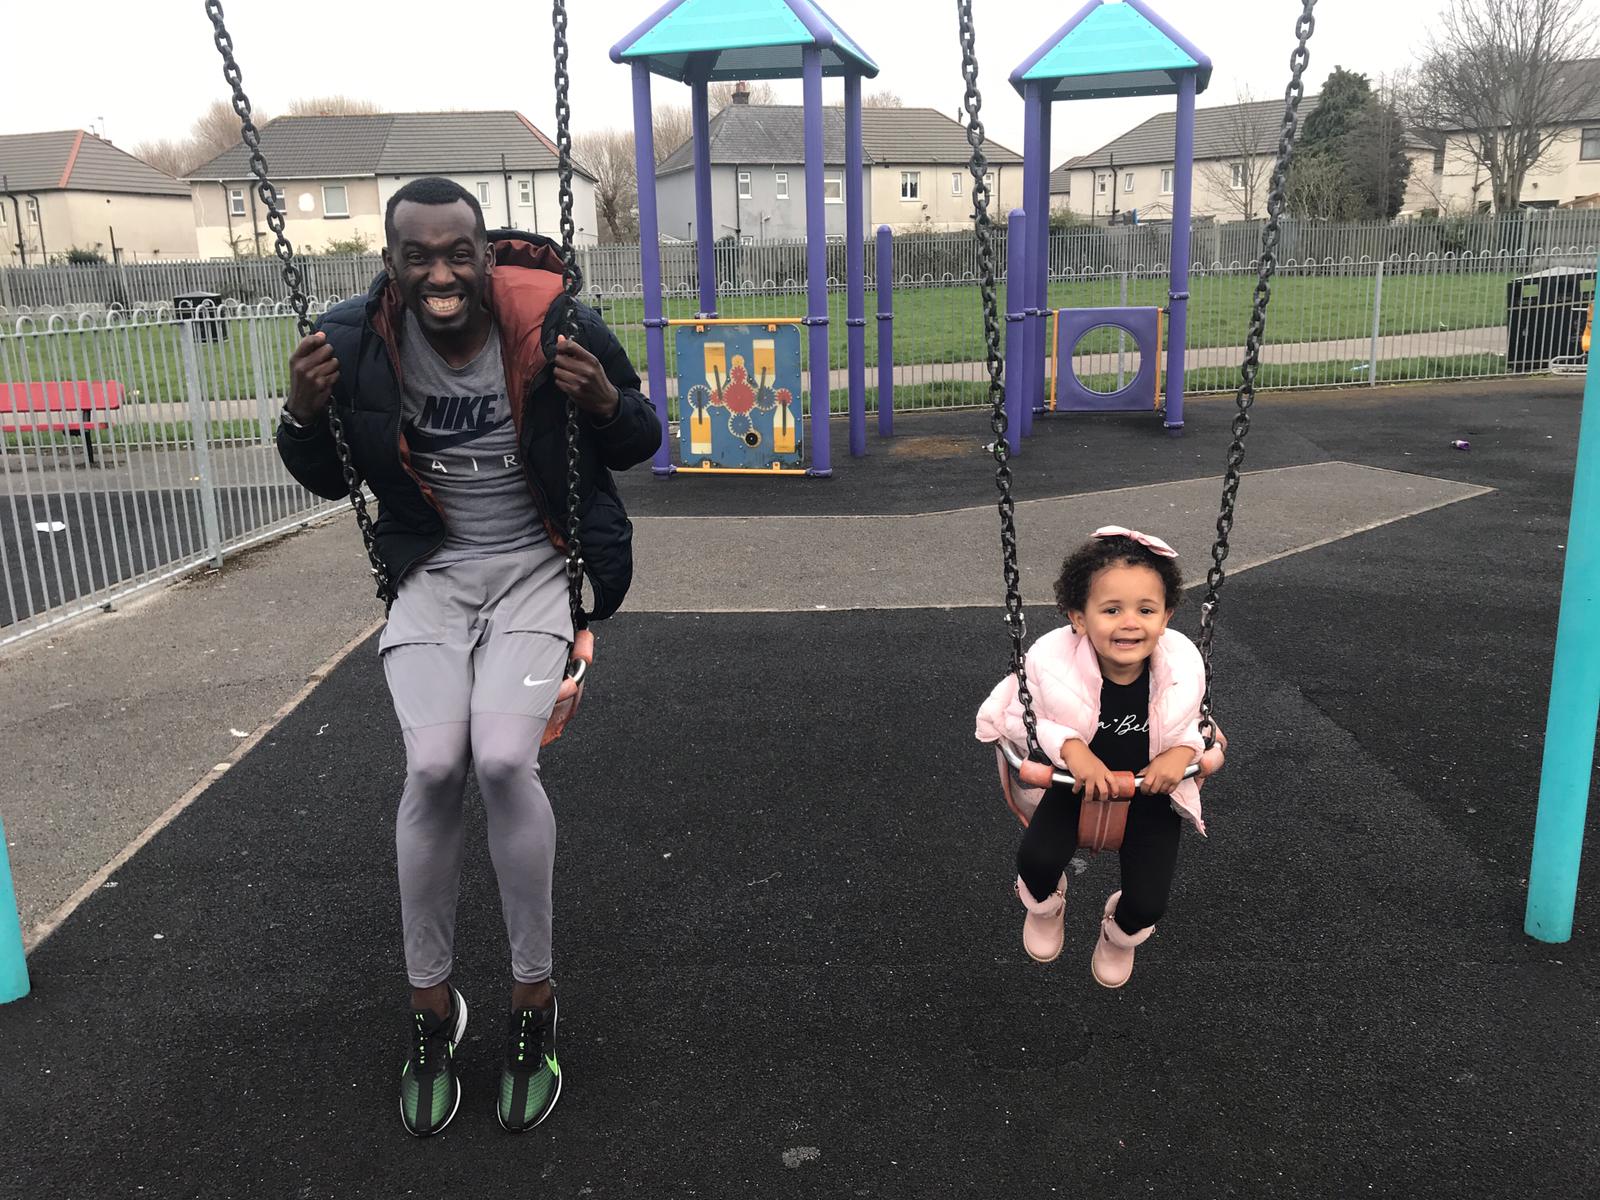 Emini on the swings with his daughter